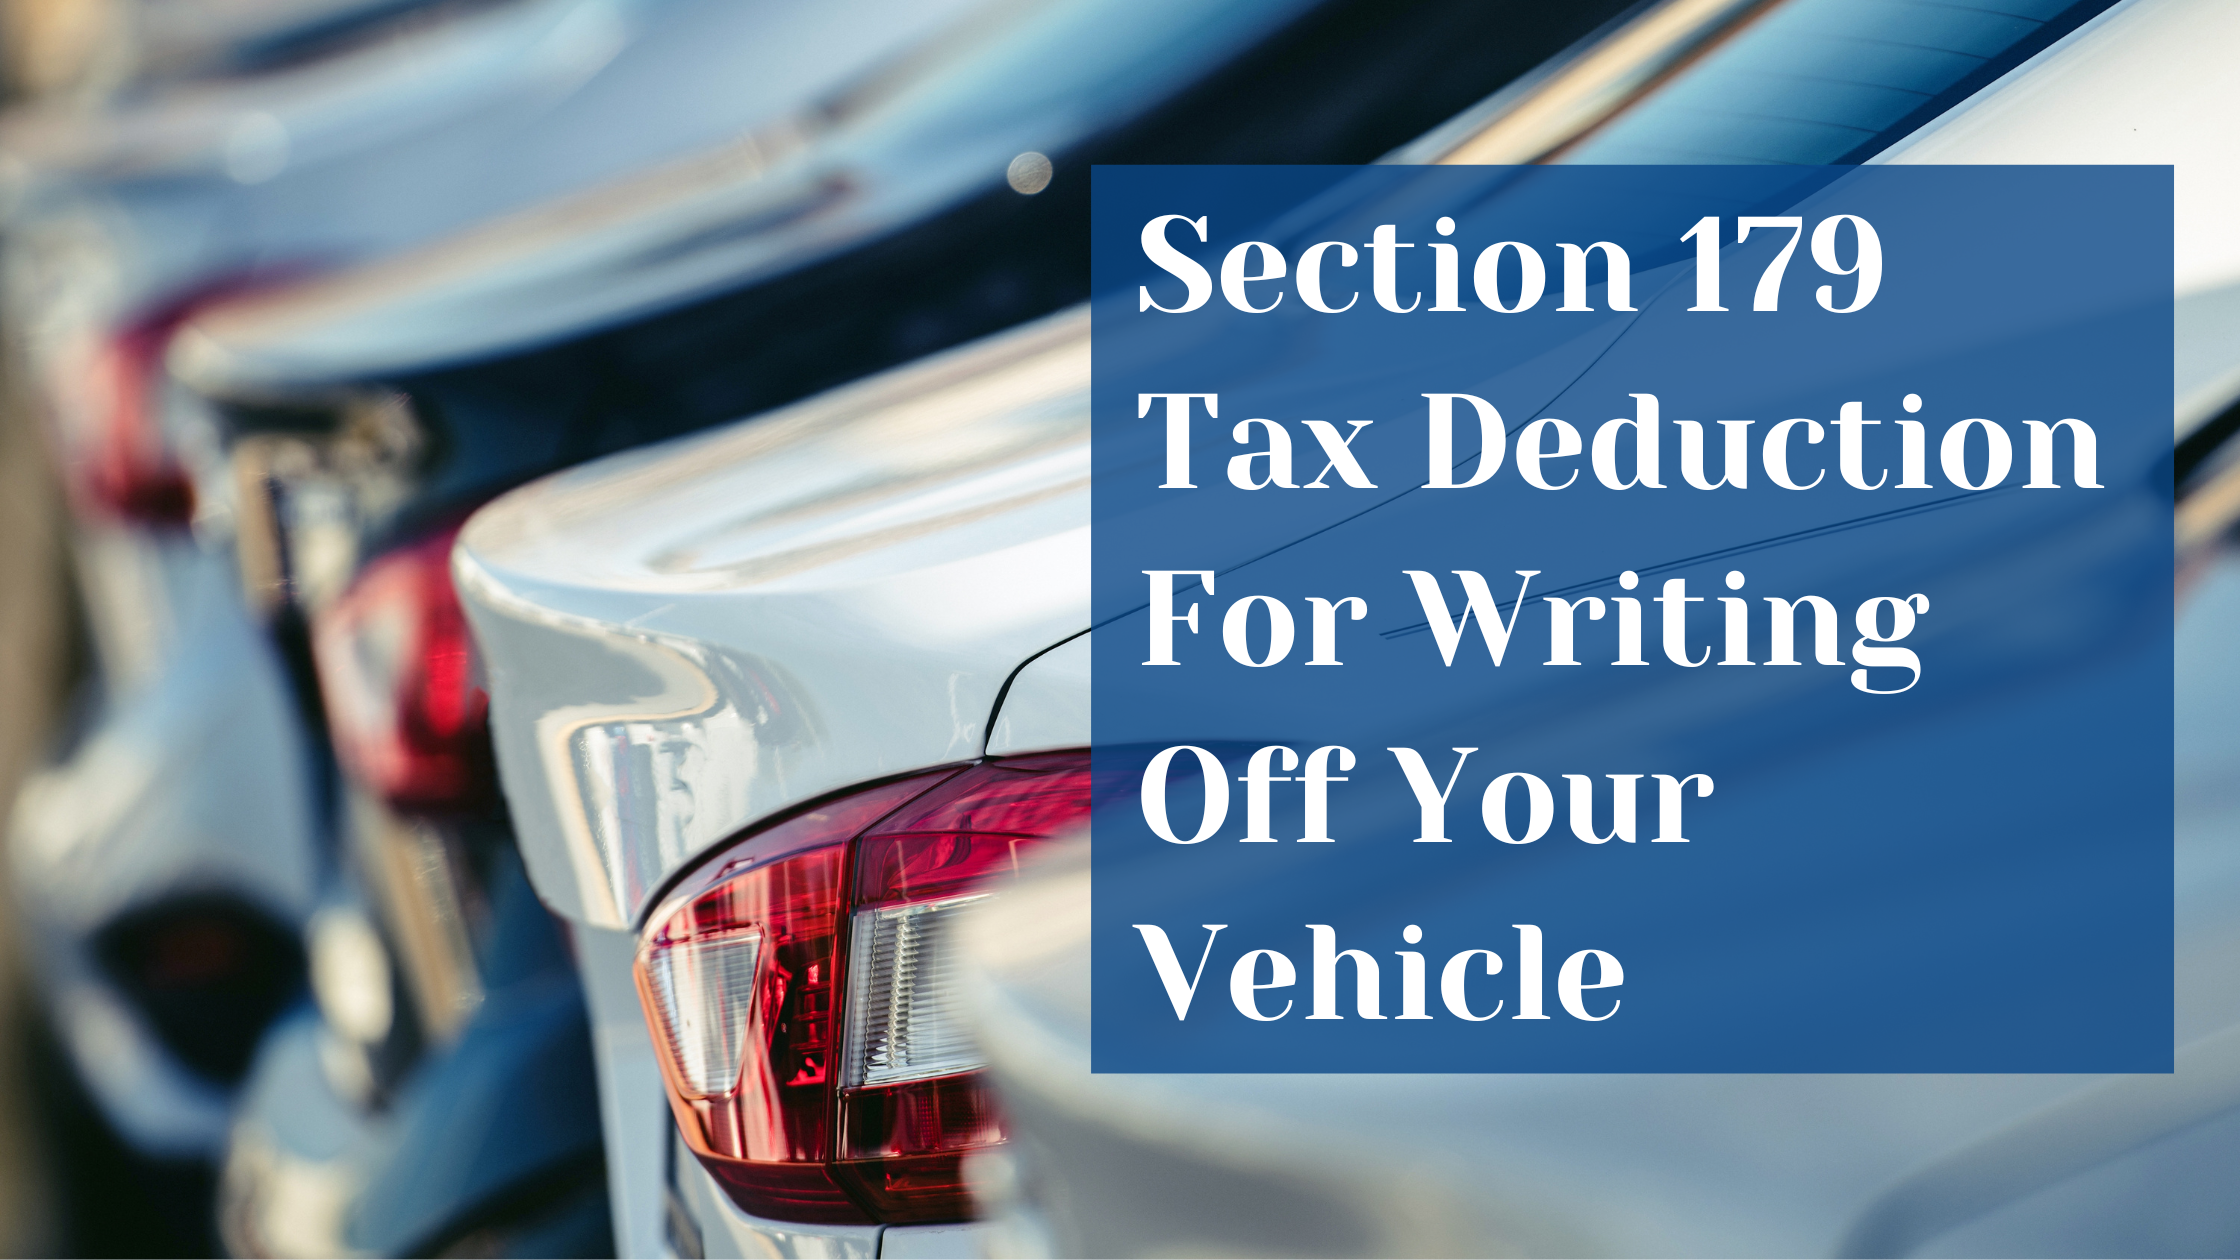 Section 179 Tax Deduction For Writing Off Your Vehicle